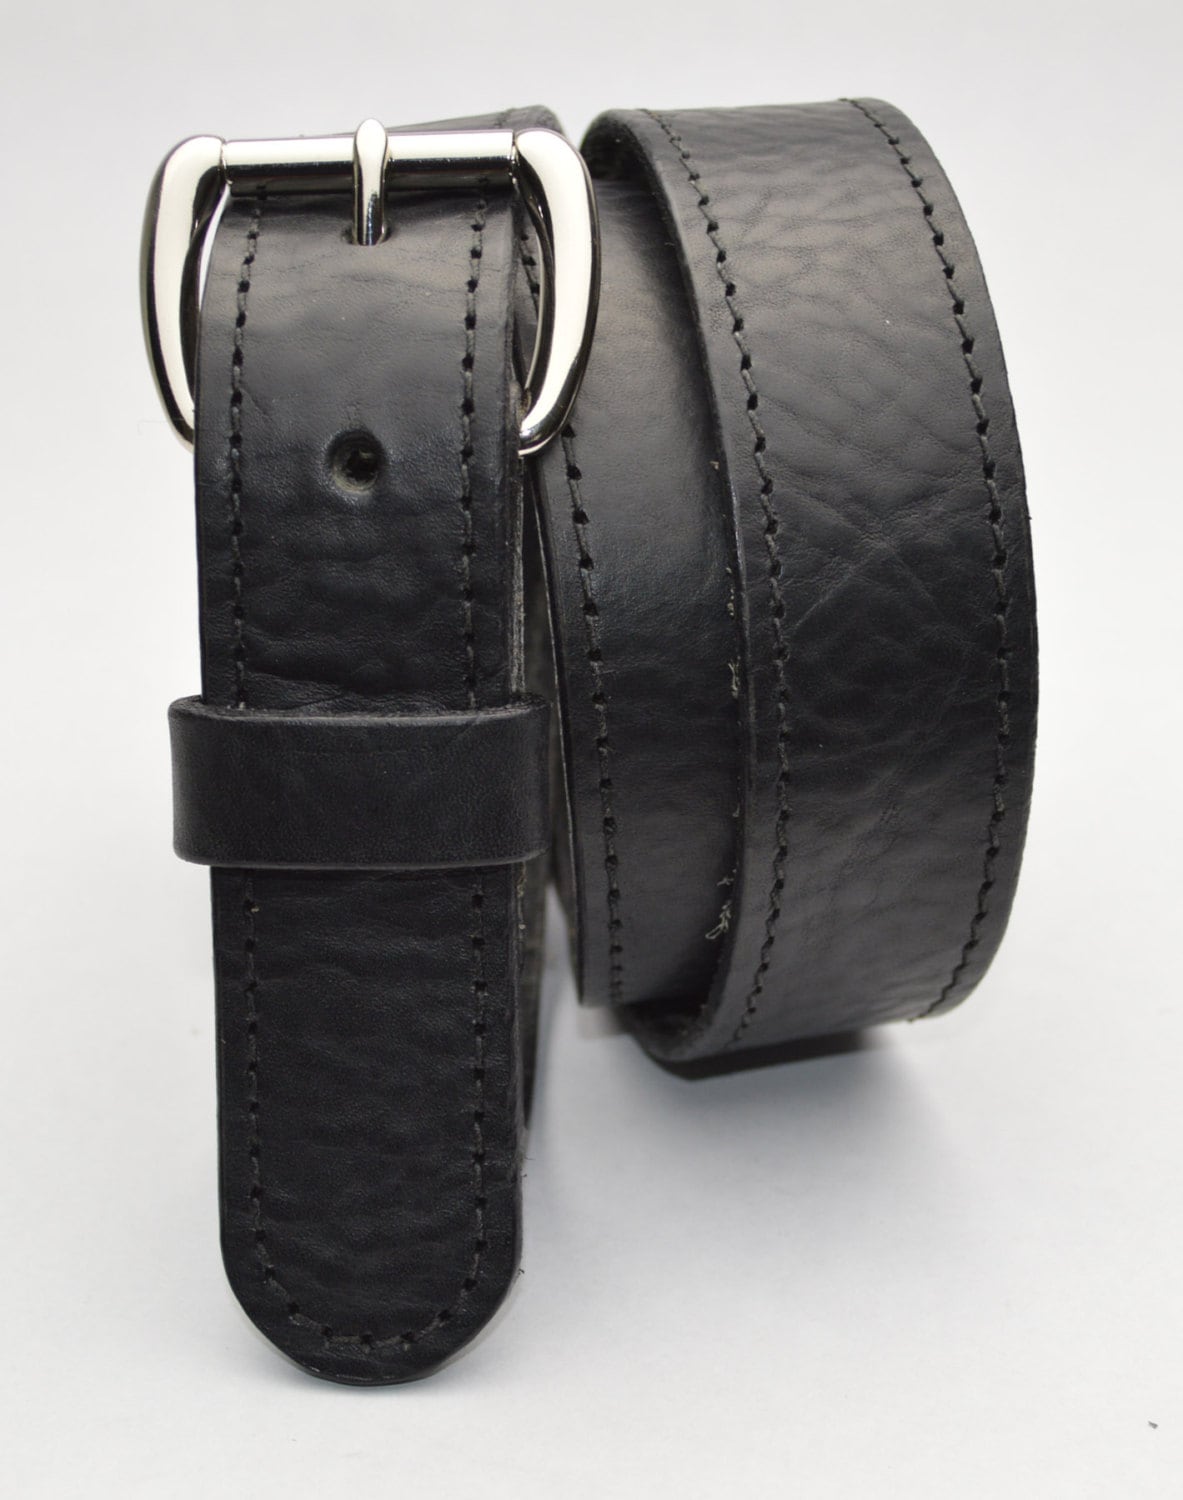 Personalized Men's Leather Belt. 1-1/4 Inch Wide. Includes